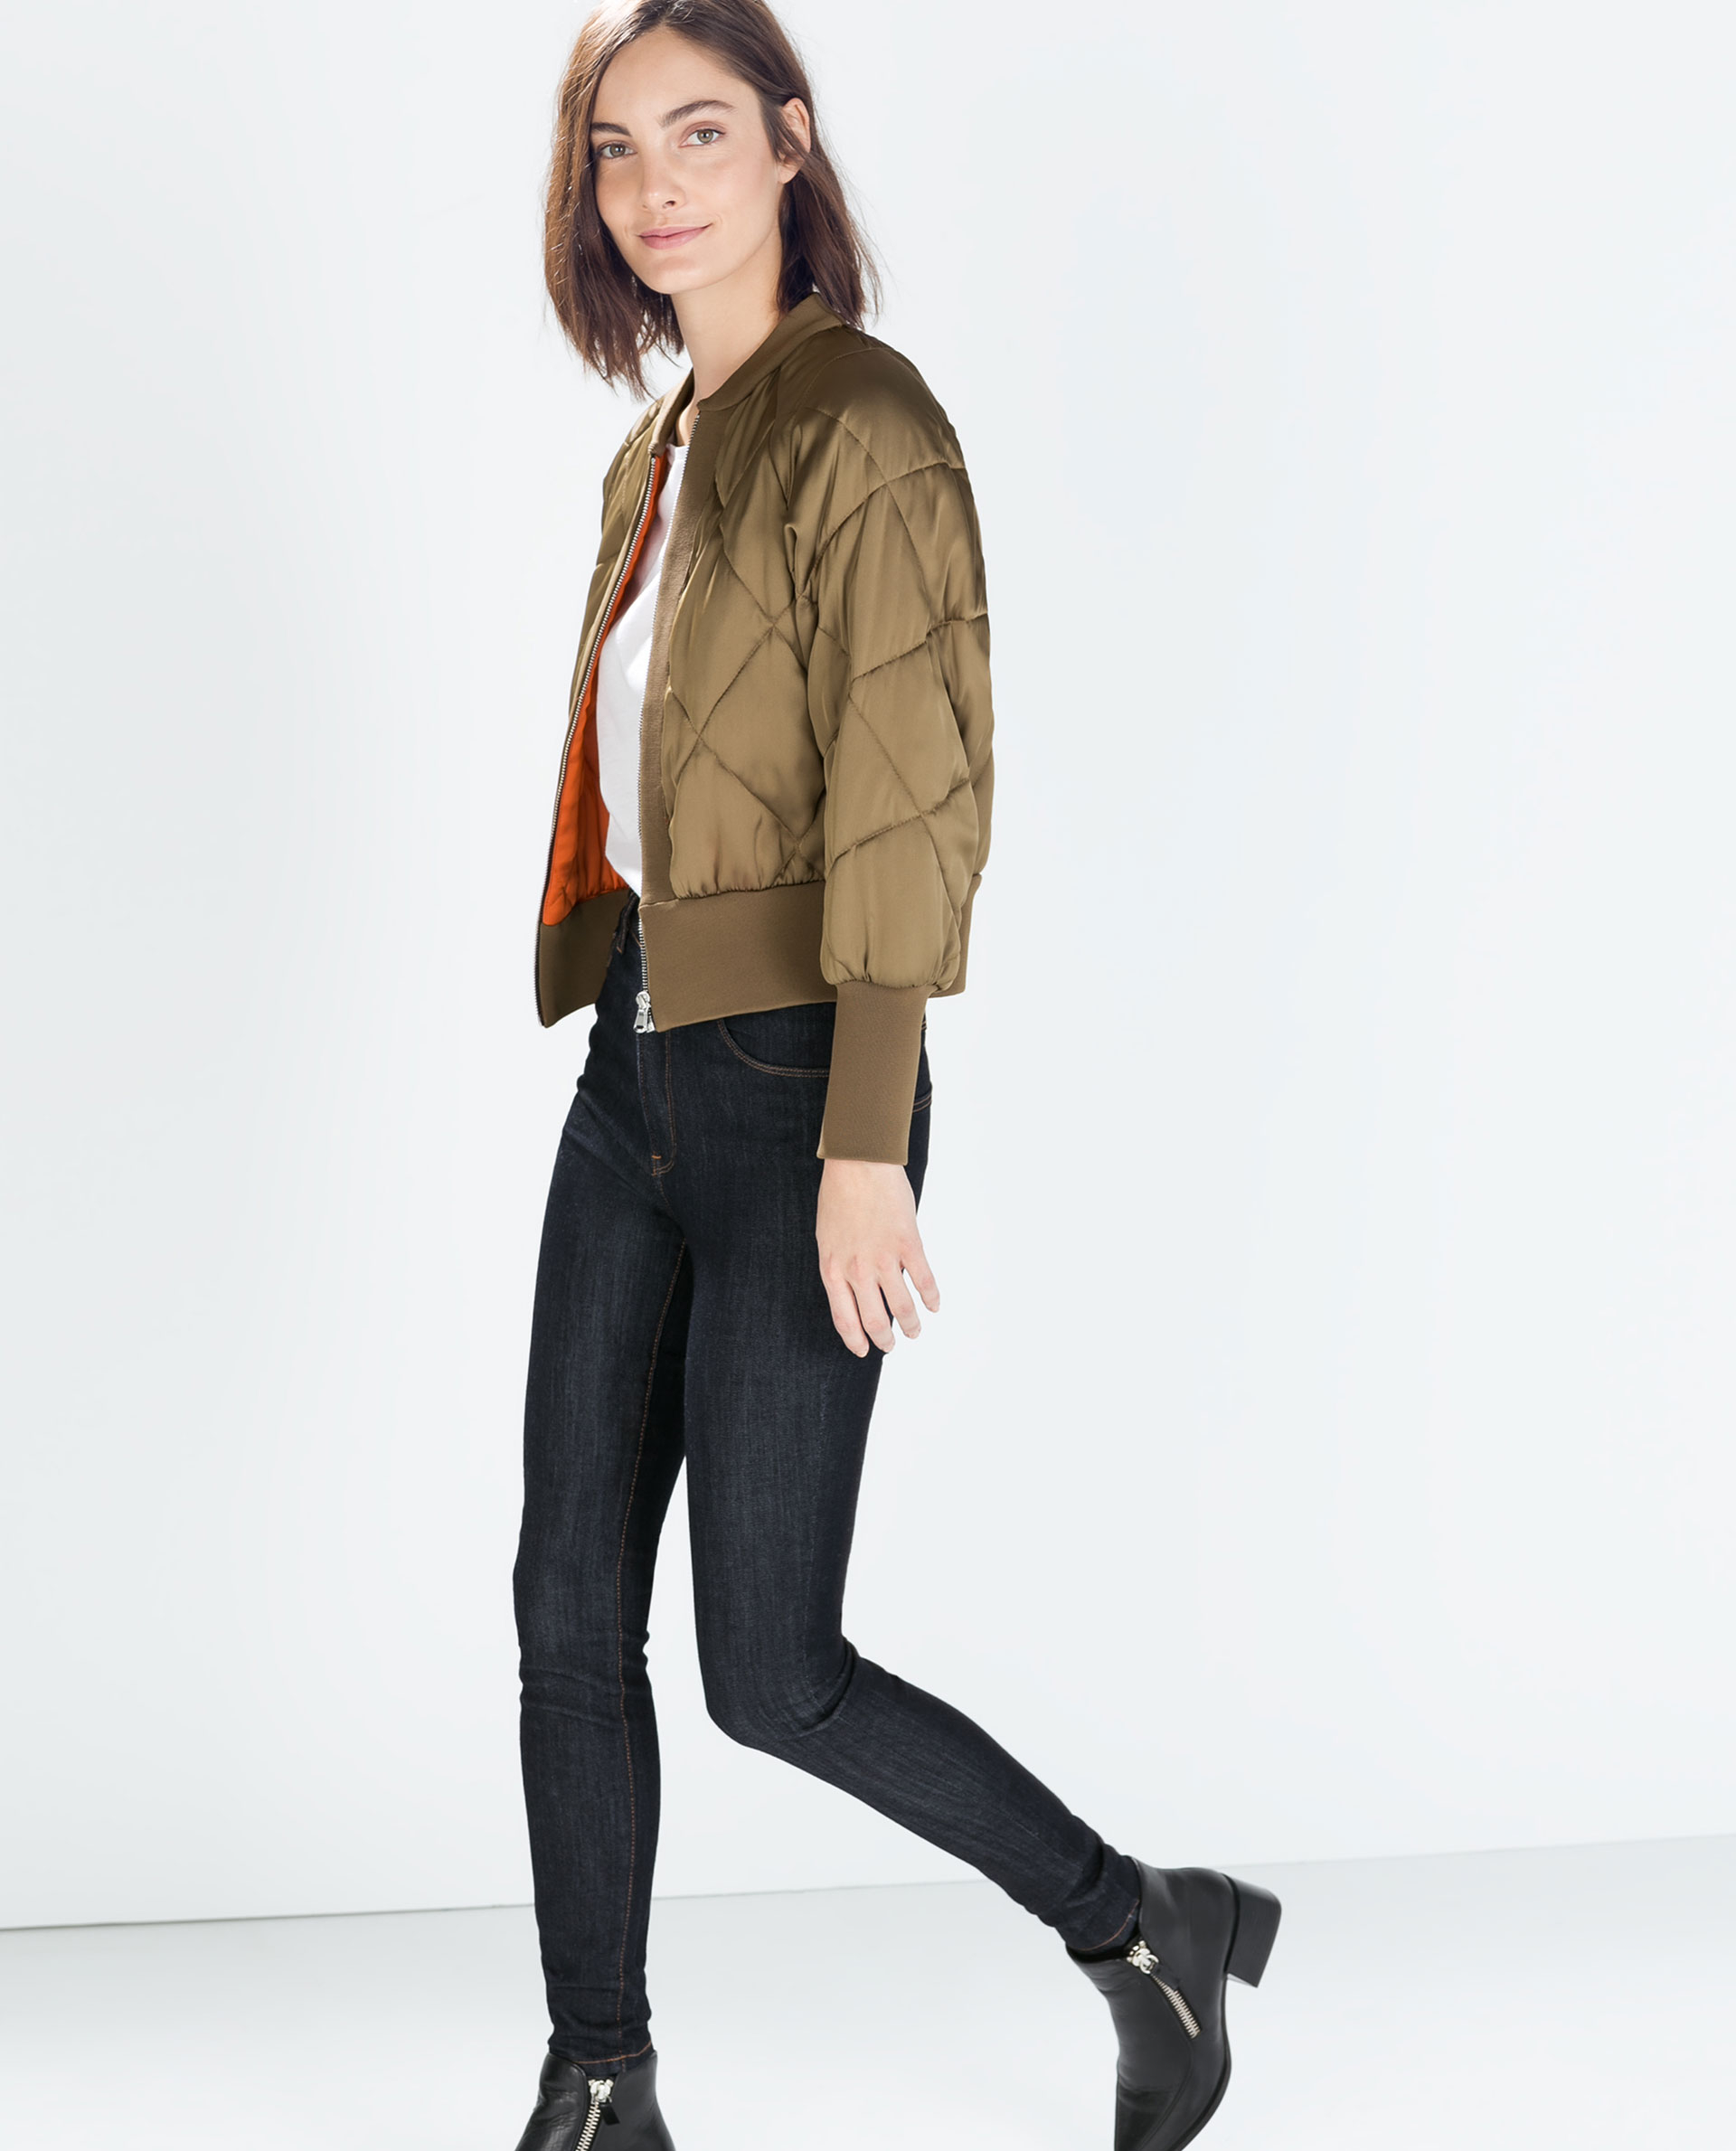 Zara Cropped Quilted Bomber Jacket in Natural | Lyst